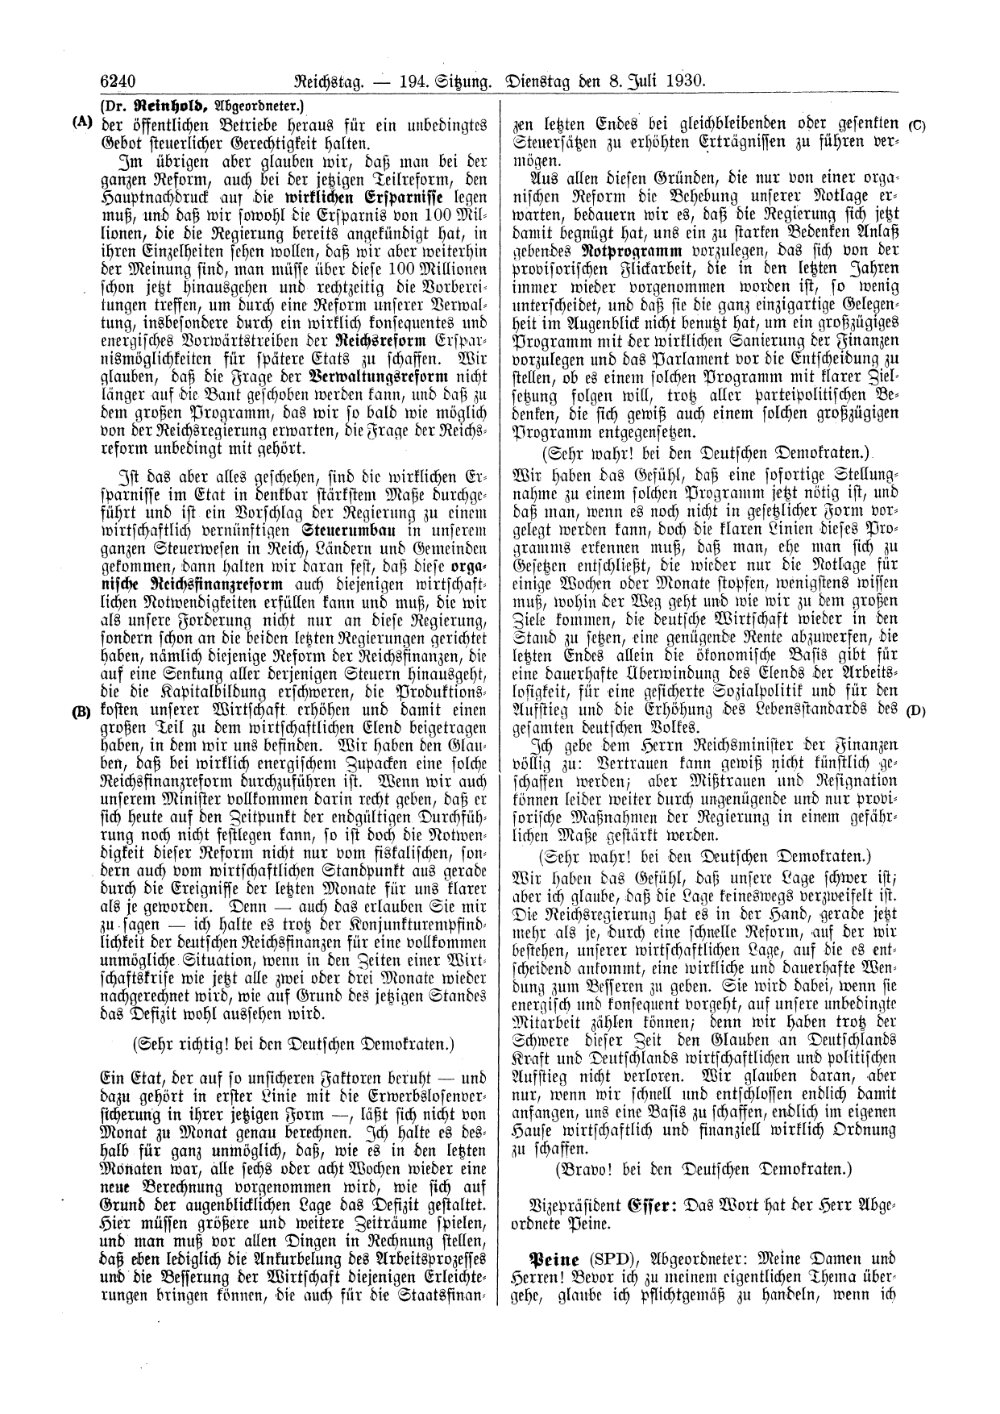 Scan of page 6240